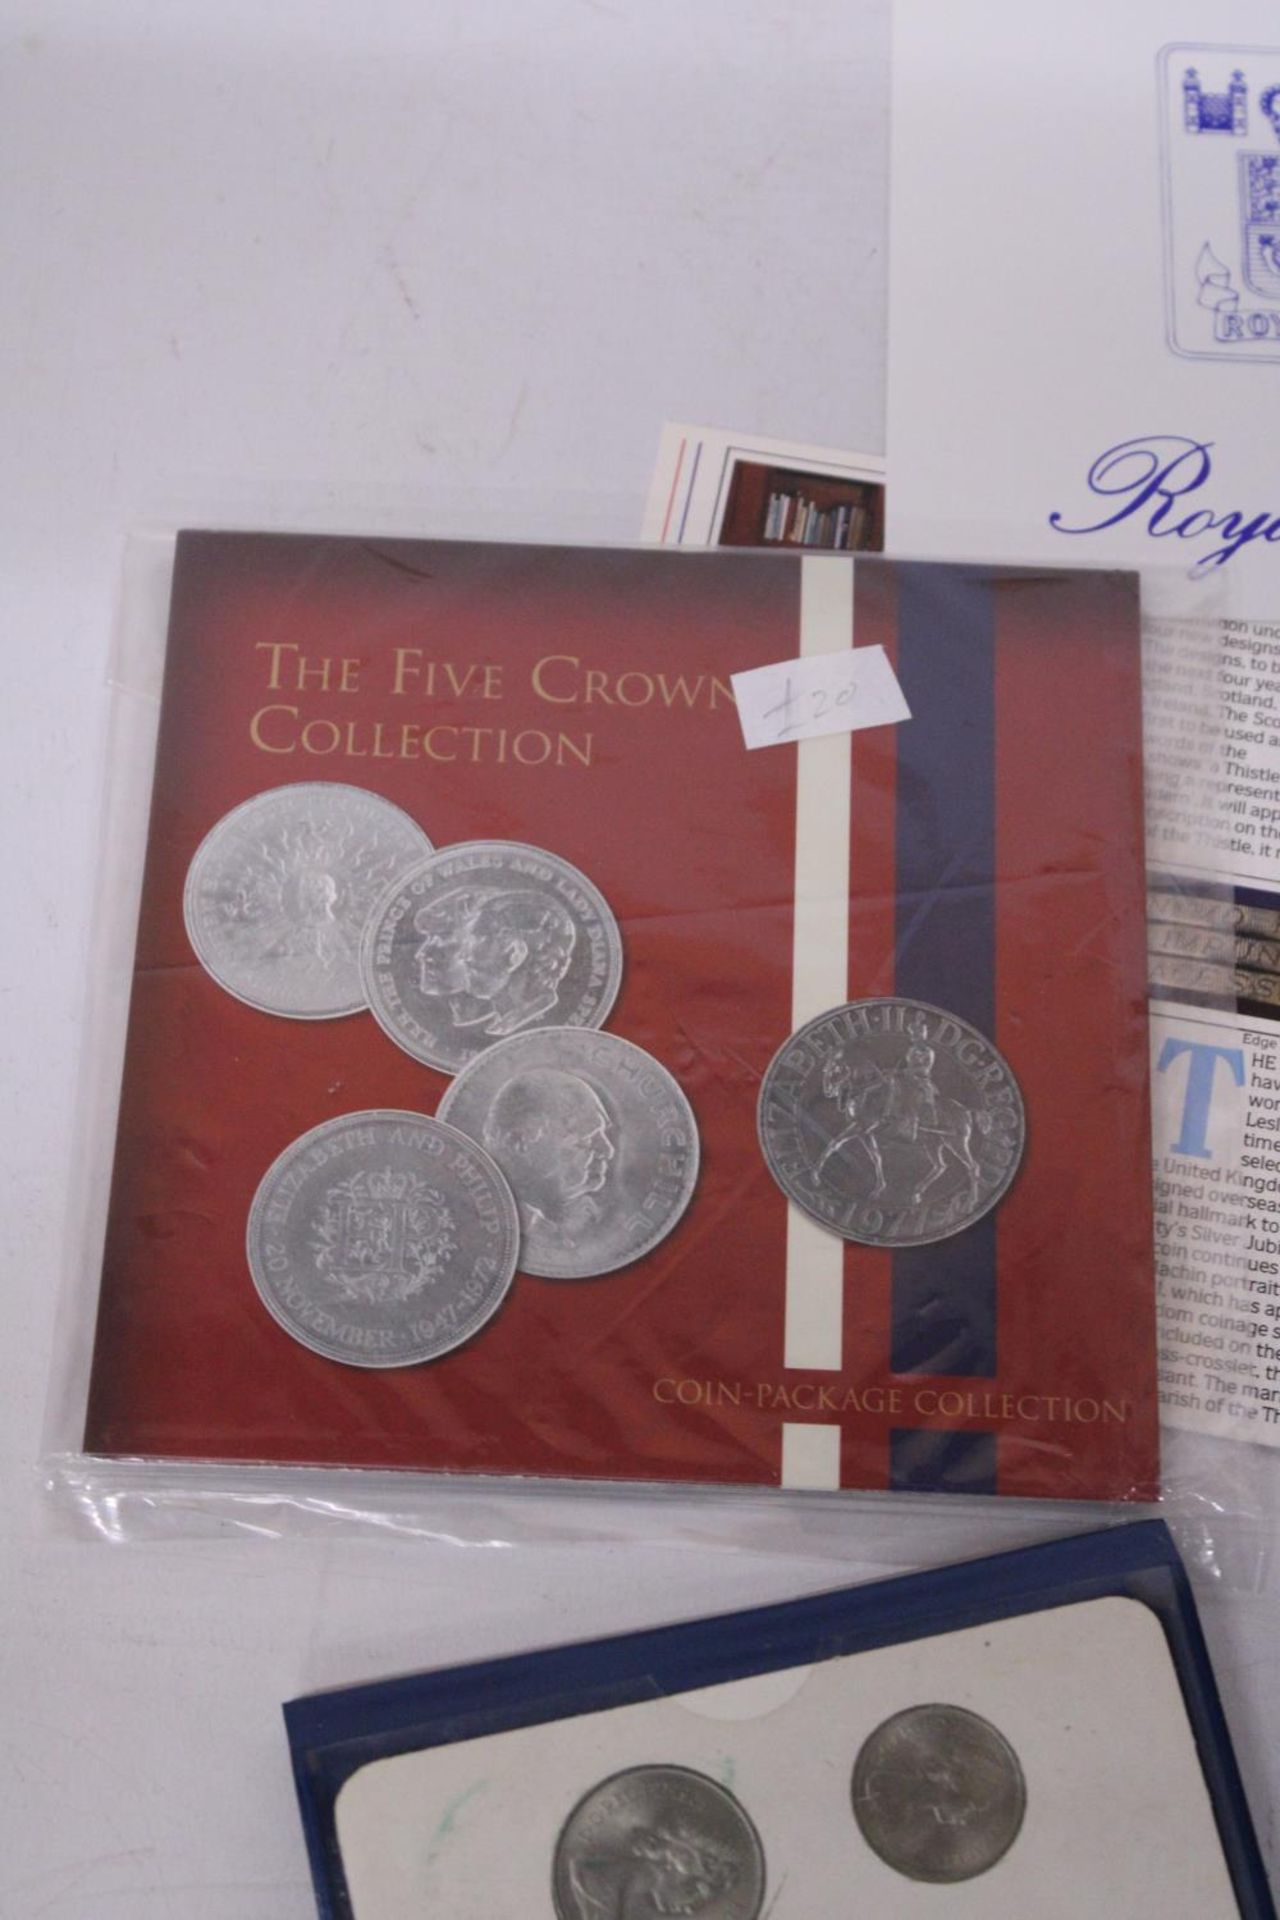 A COLLECTION OF COINS TO INCLUDE THE FIVE CROWN COLLECTION, 1984 ROYAL MINT UNCIRCULATED COIN - Image 2 of 5